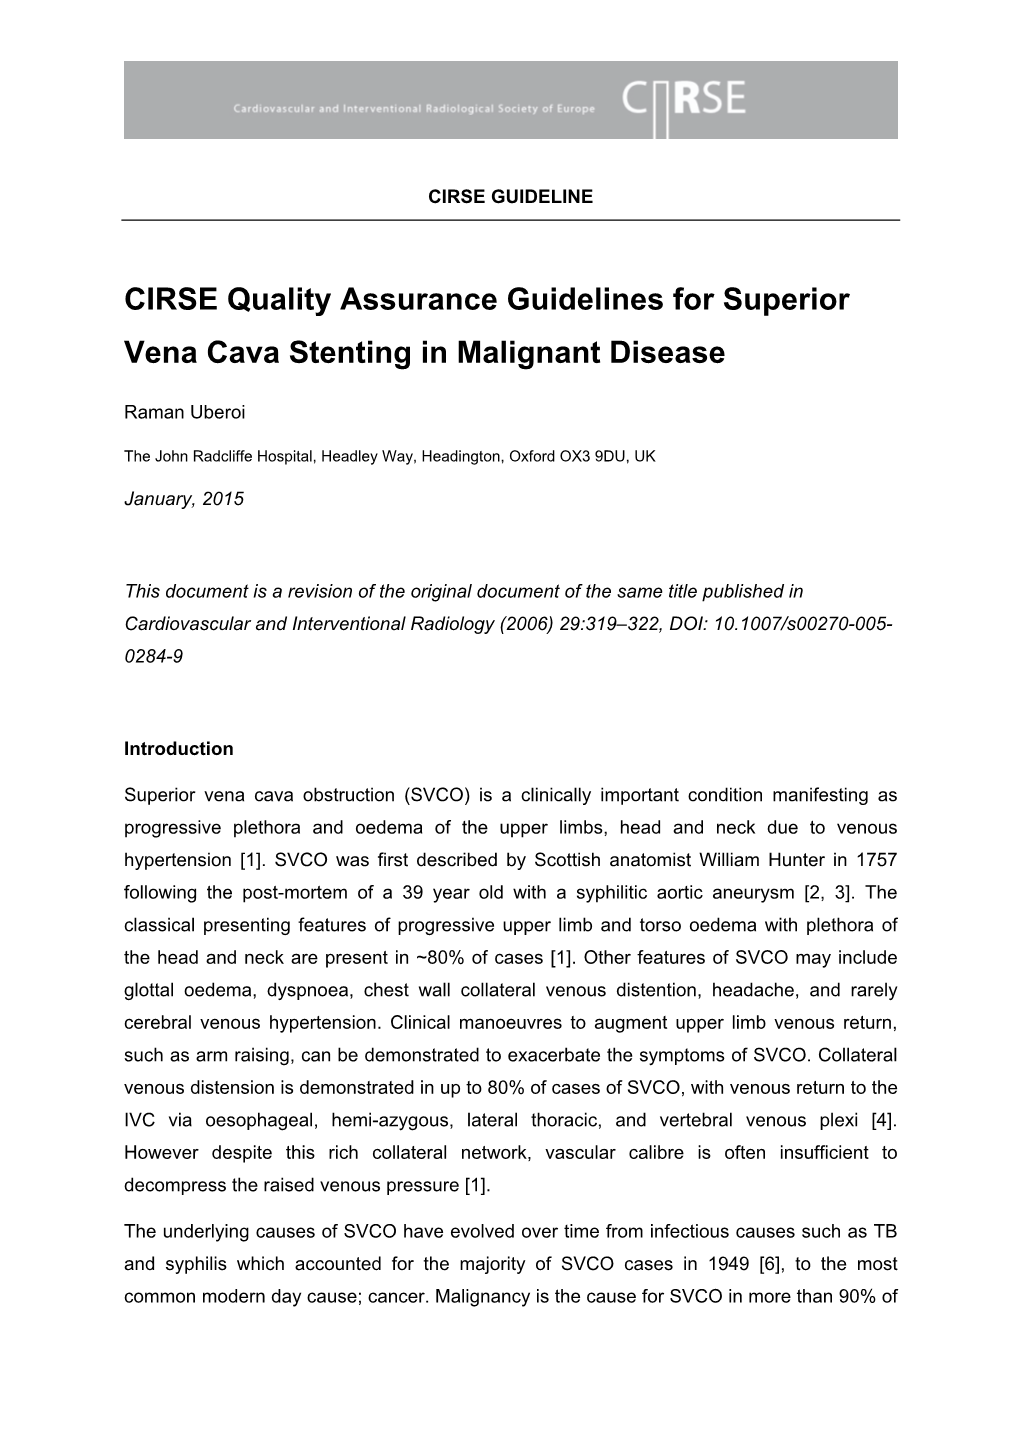 CIRSE Quality Assurance Guidelines for Superior Vena Cava Stenting in Malignant Disease